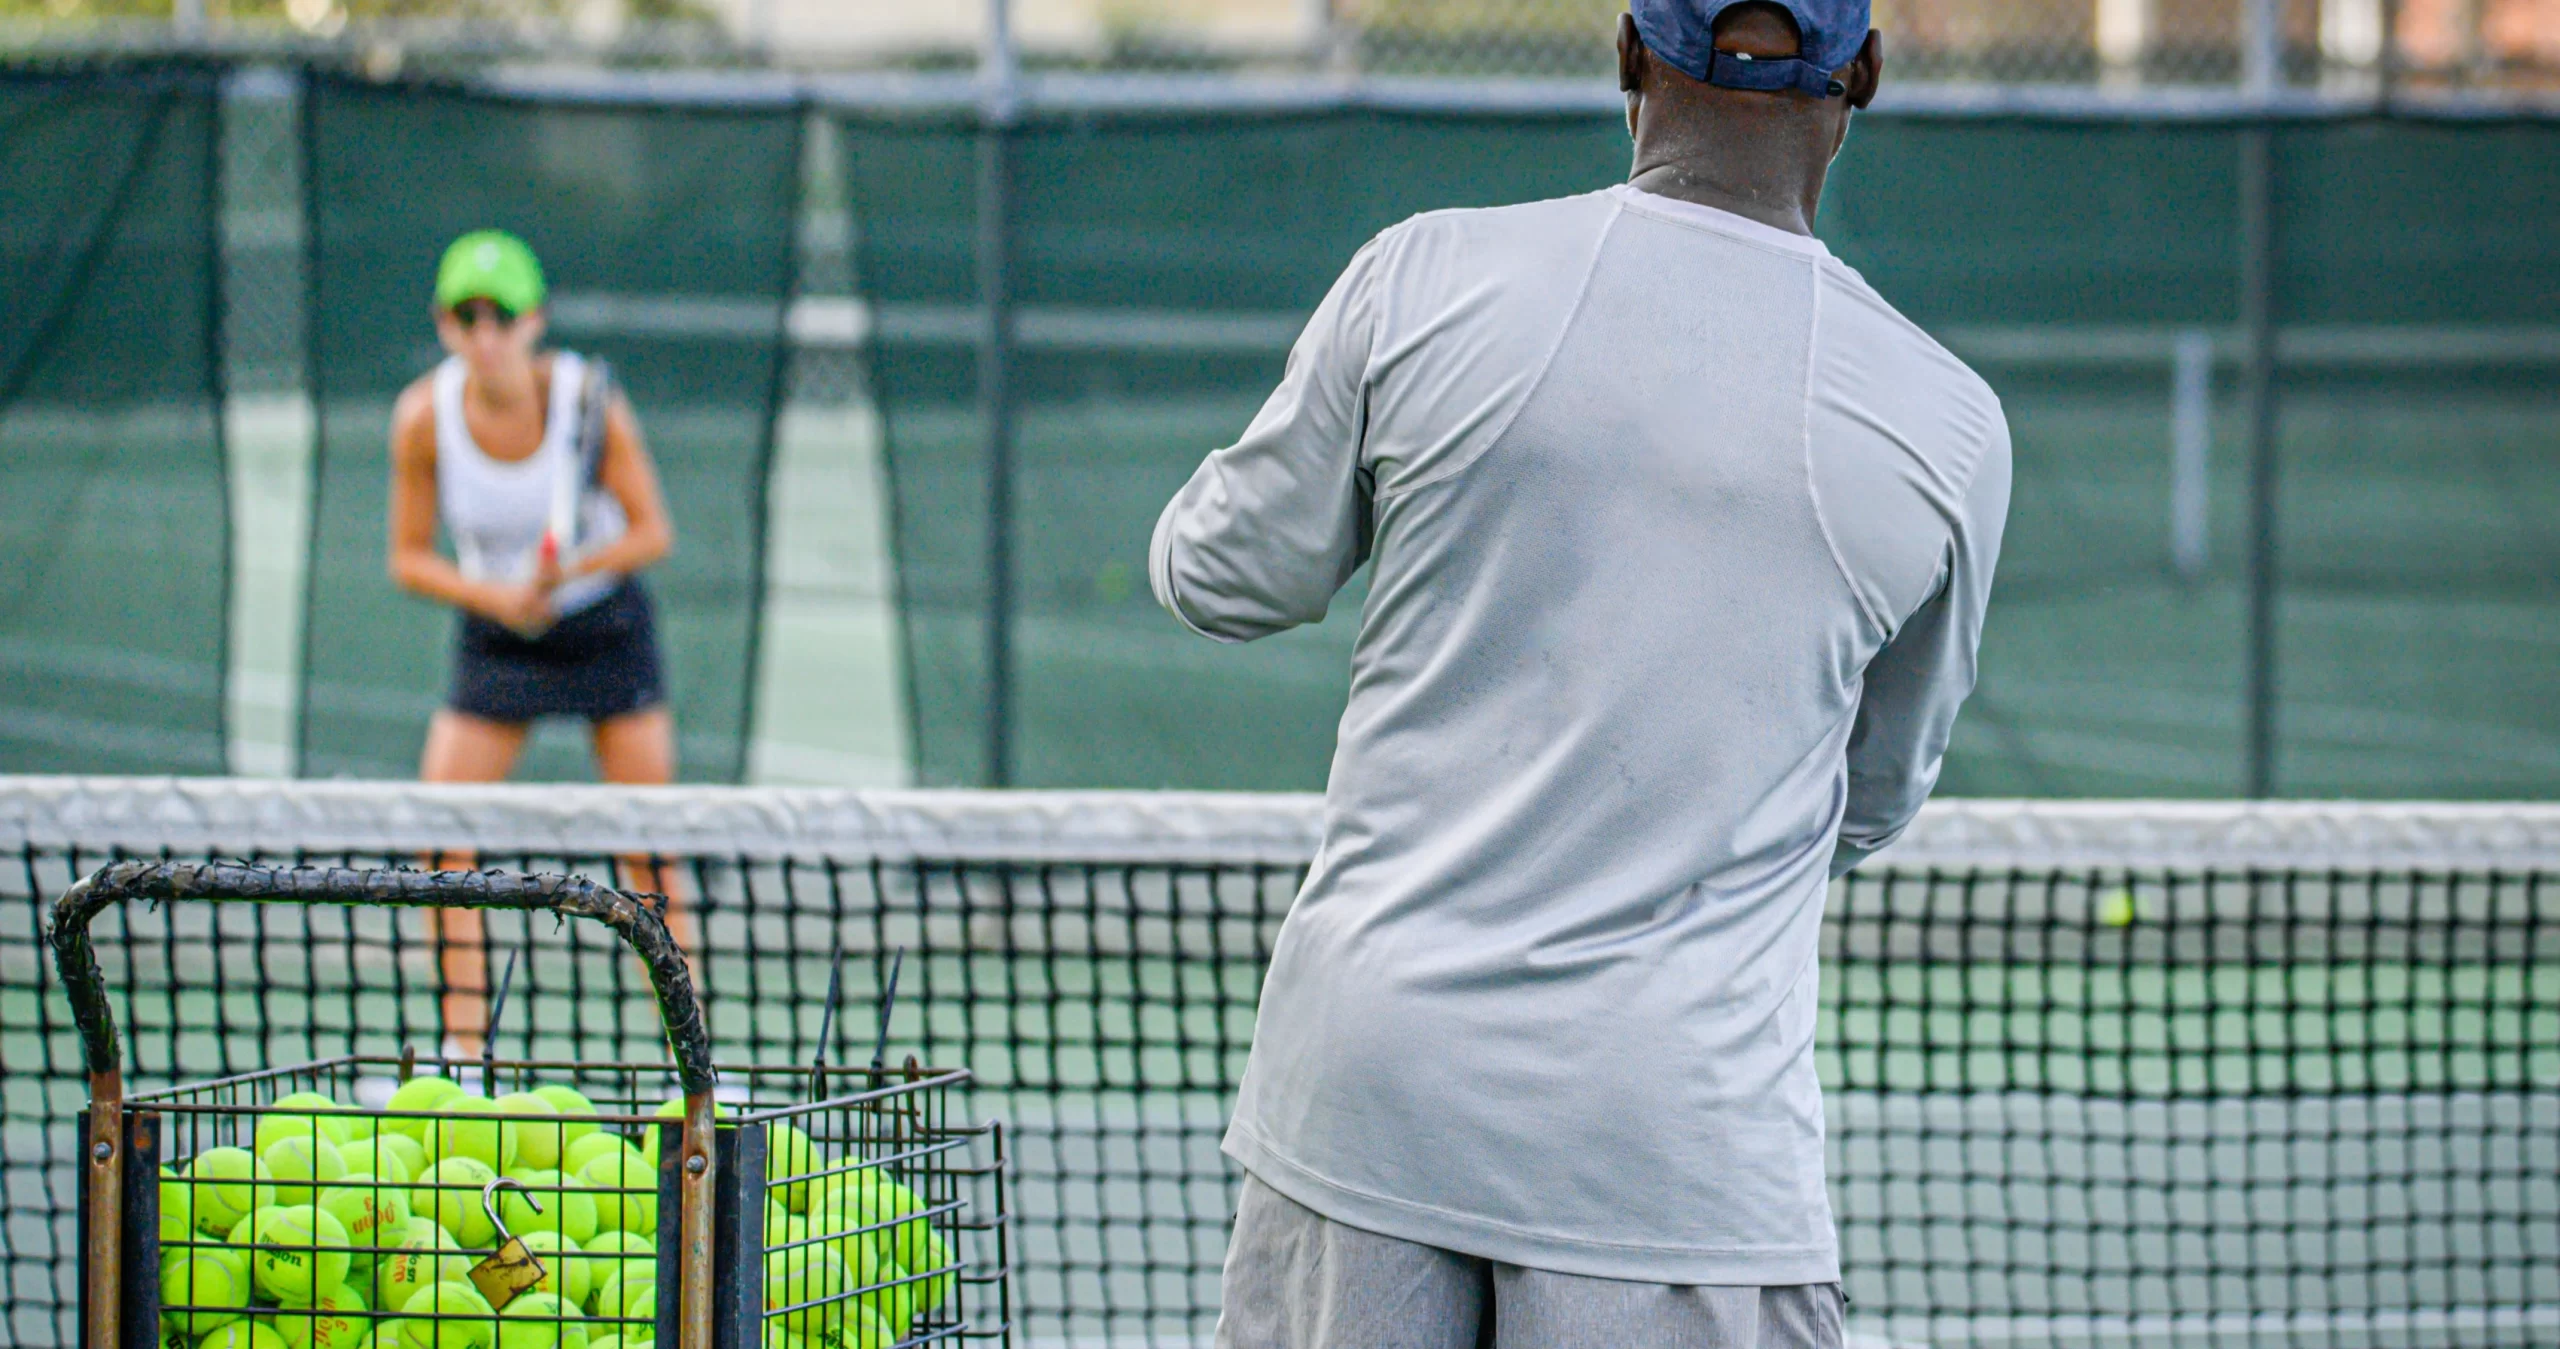 Tennis Coach with Blue Cap Feeding Balls to a Student